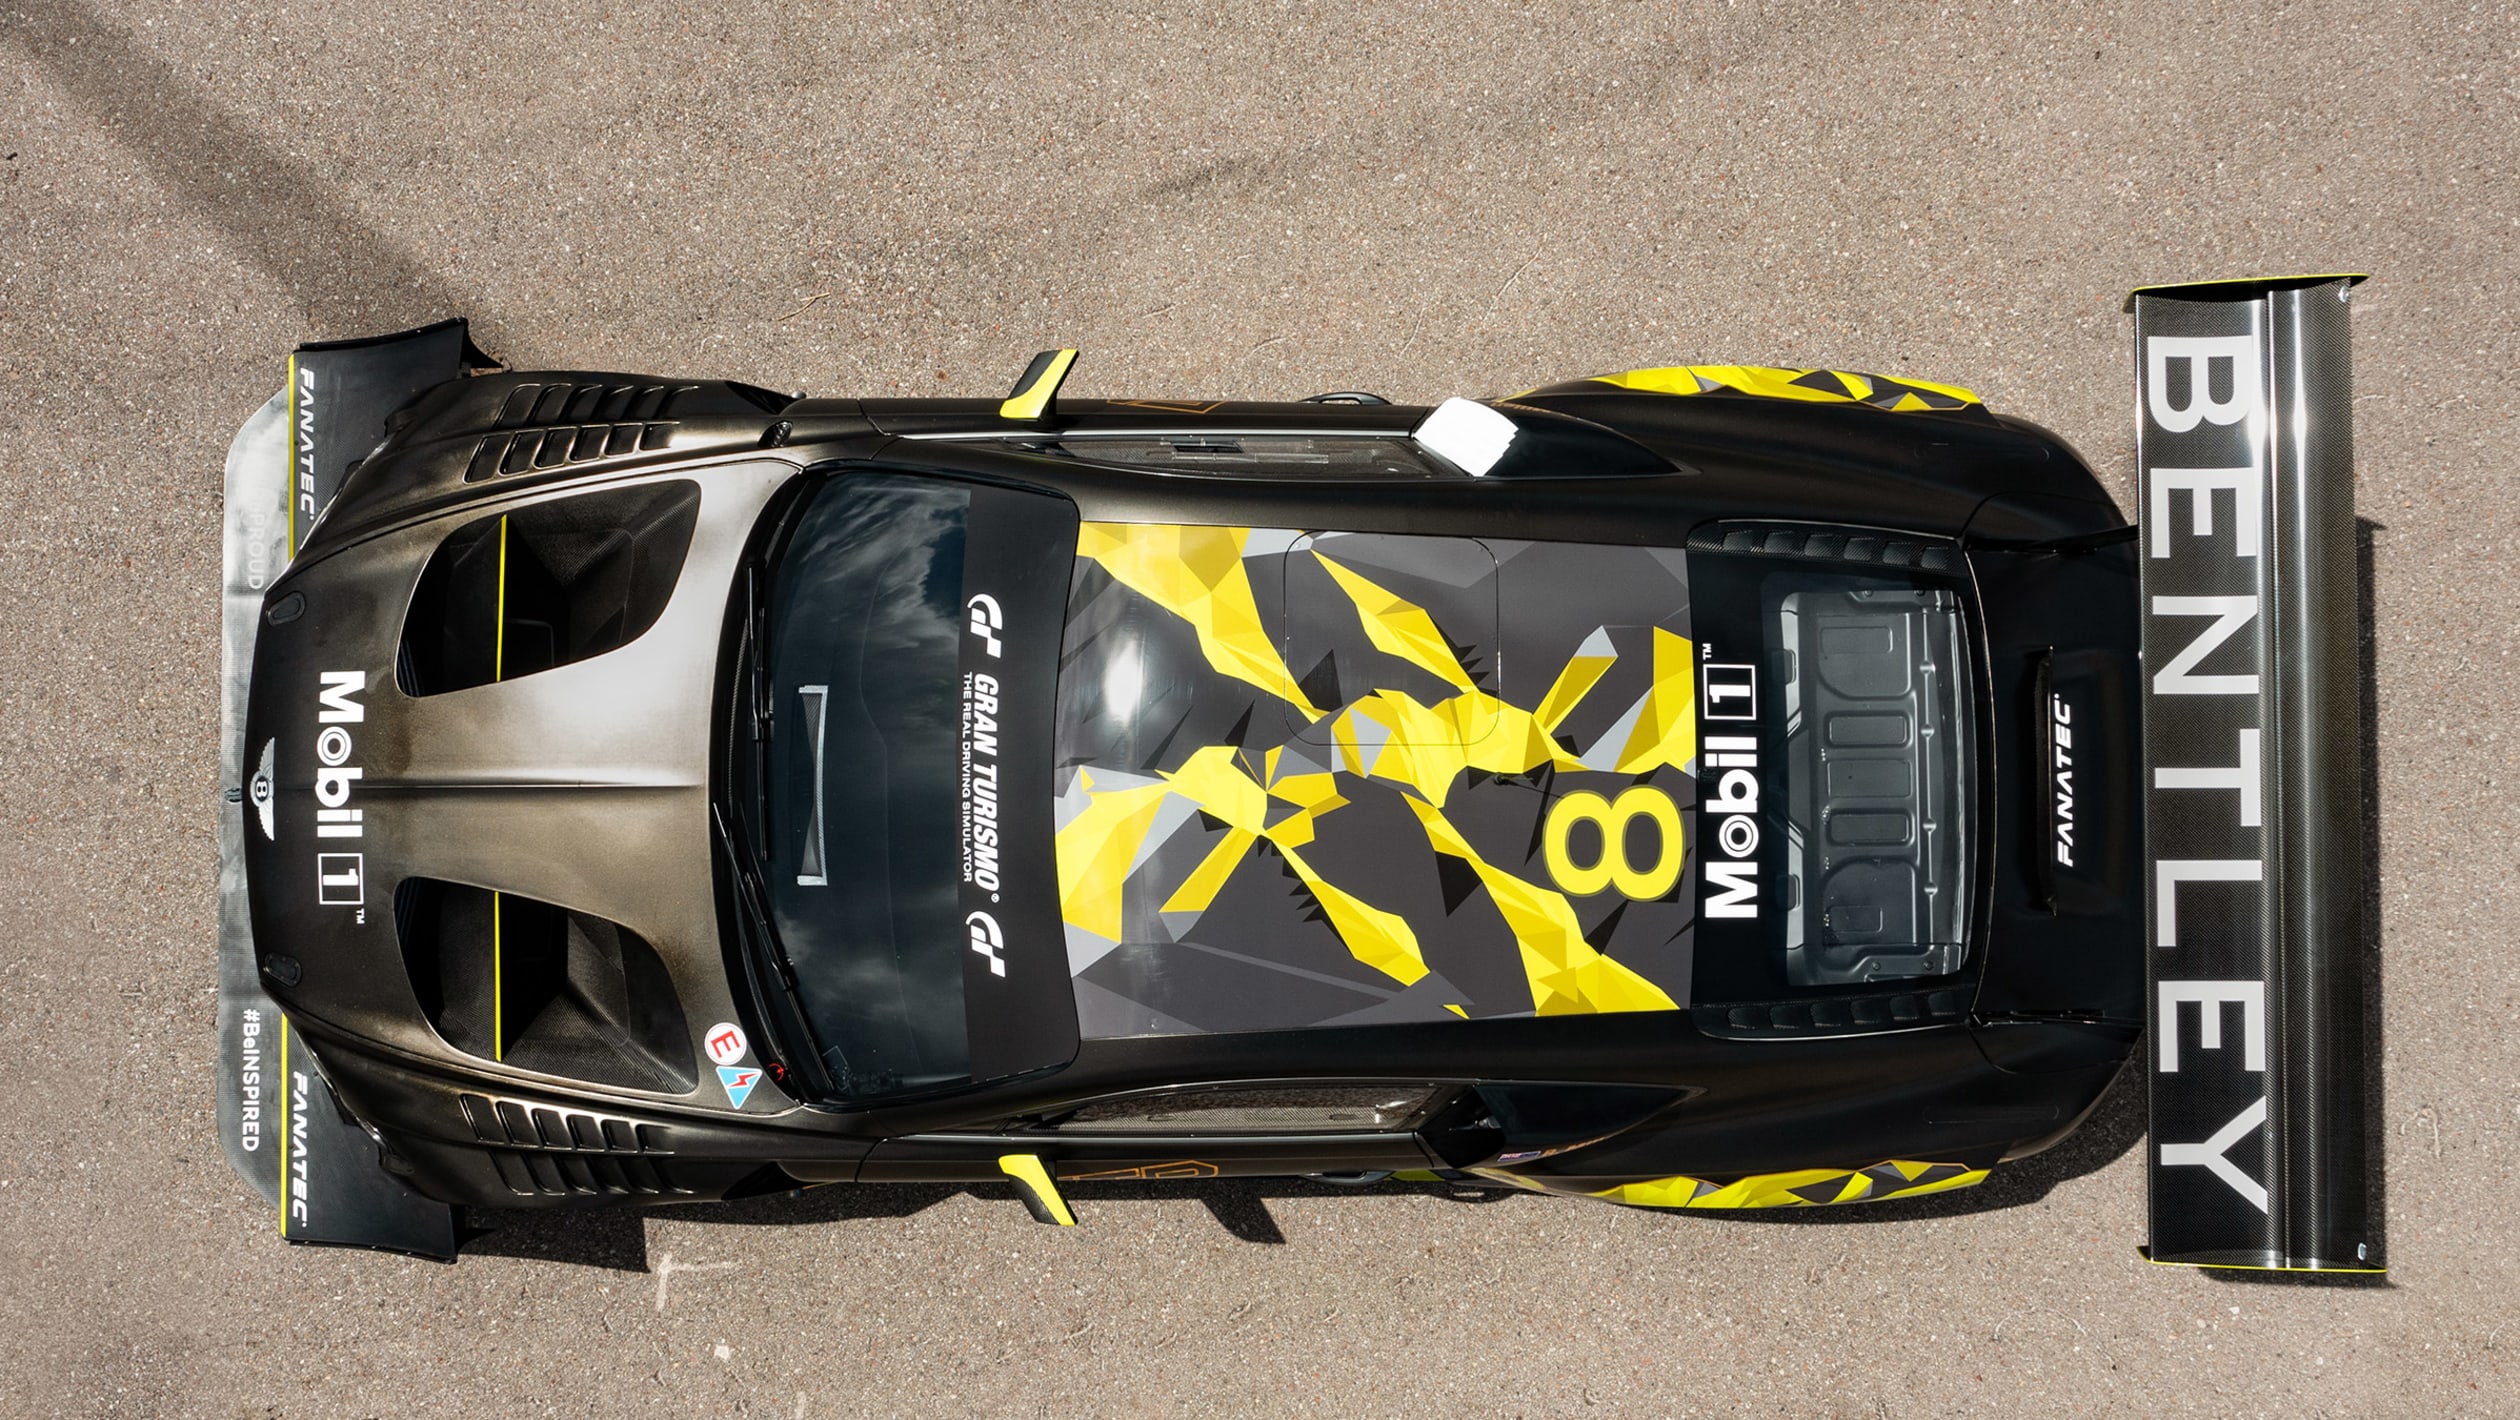 Continental GT3 Pikes Peak Livery 7